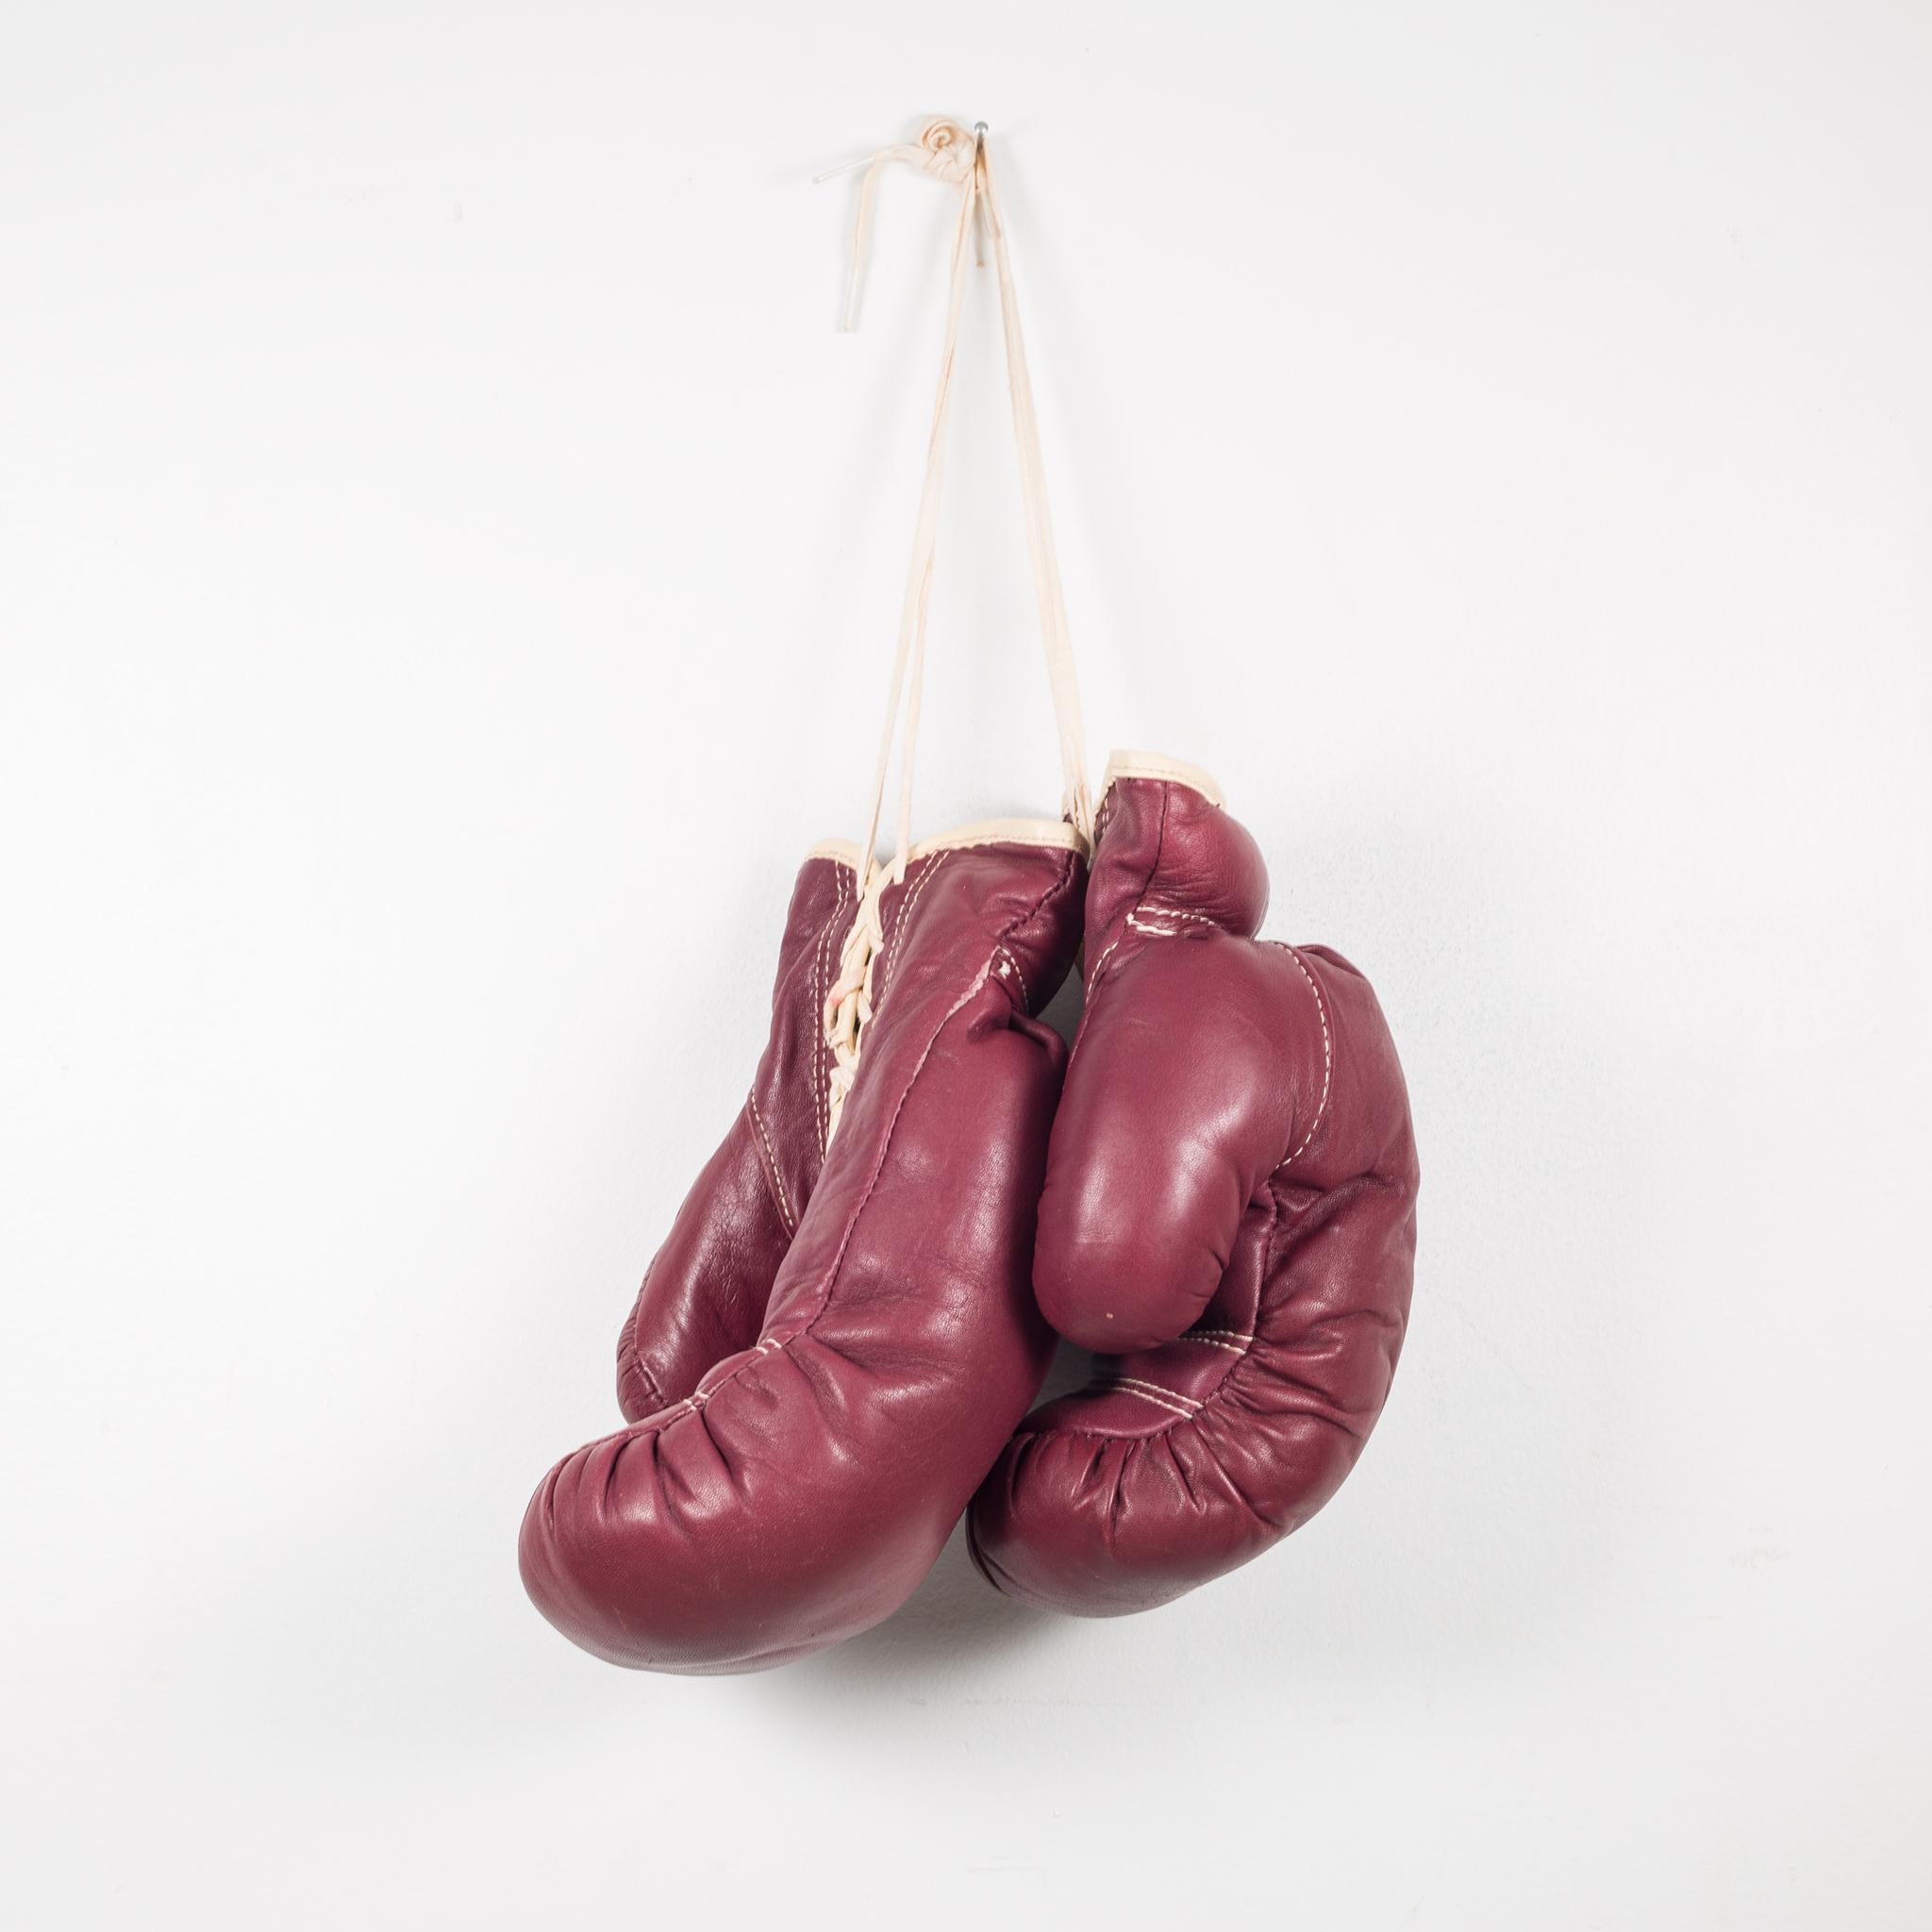 1960 boxing gloves